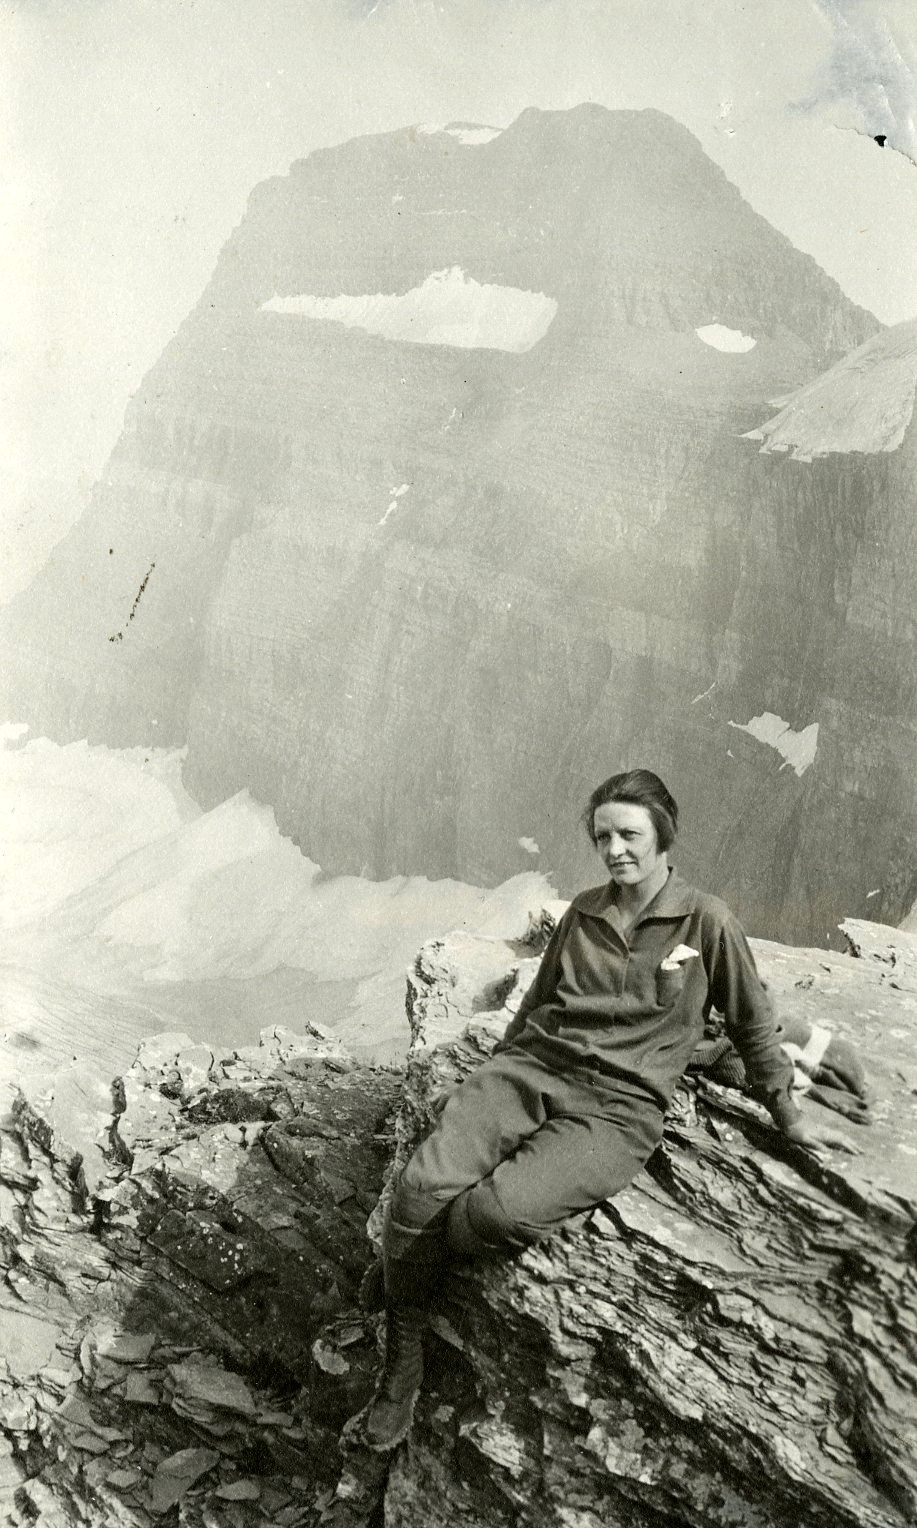 Mary Cronin on a CMC trip in the 1920s